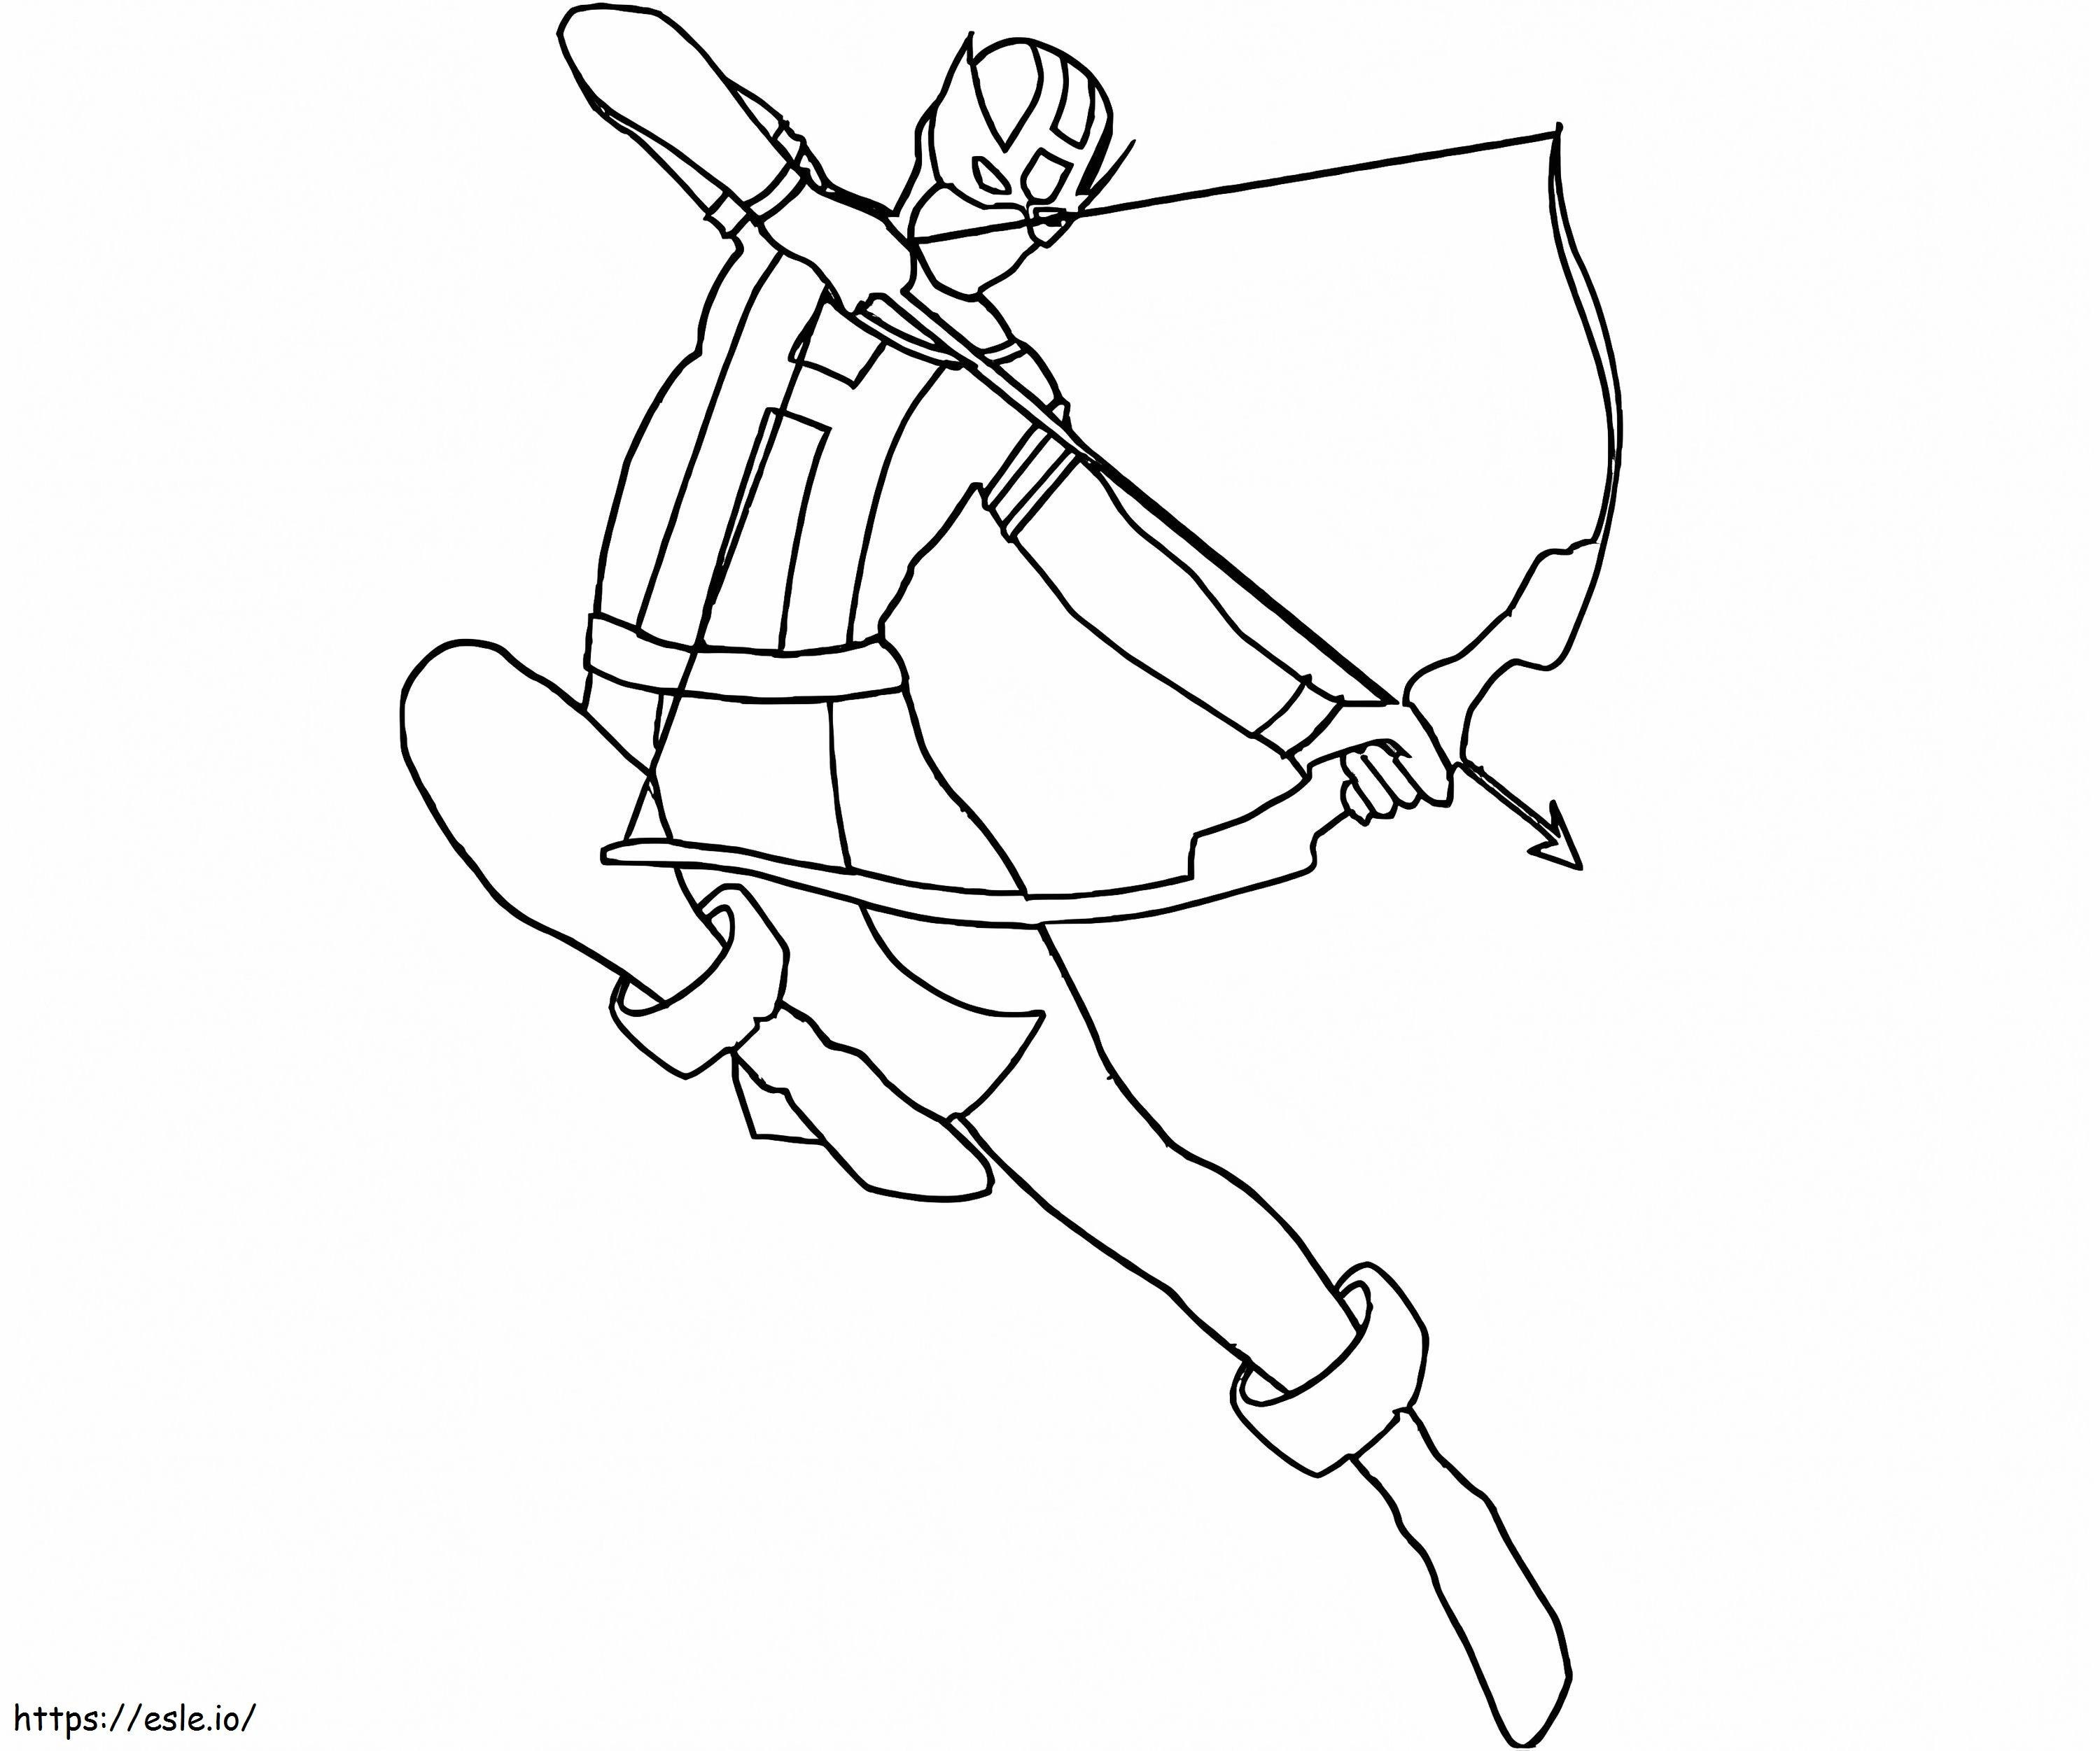 Hawkeye 1 coloring page